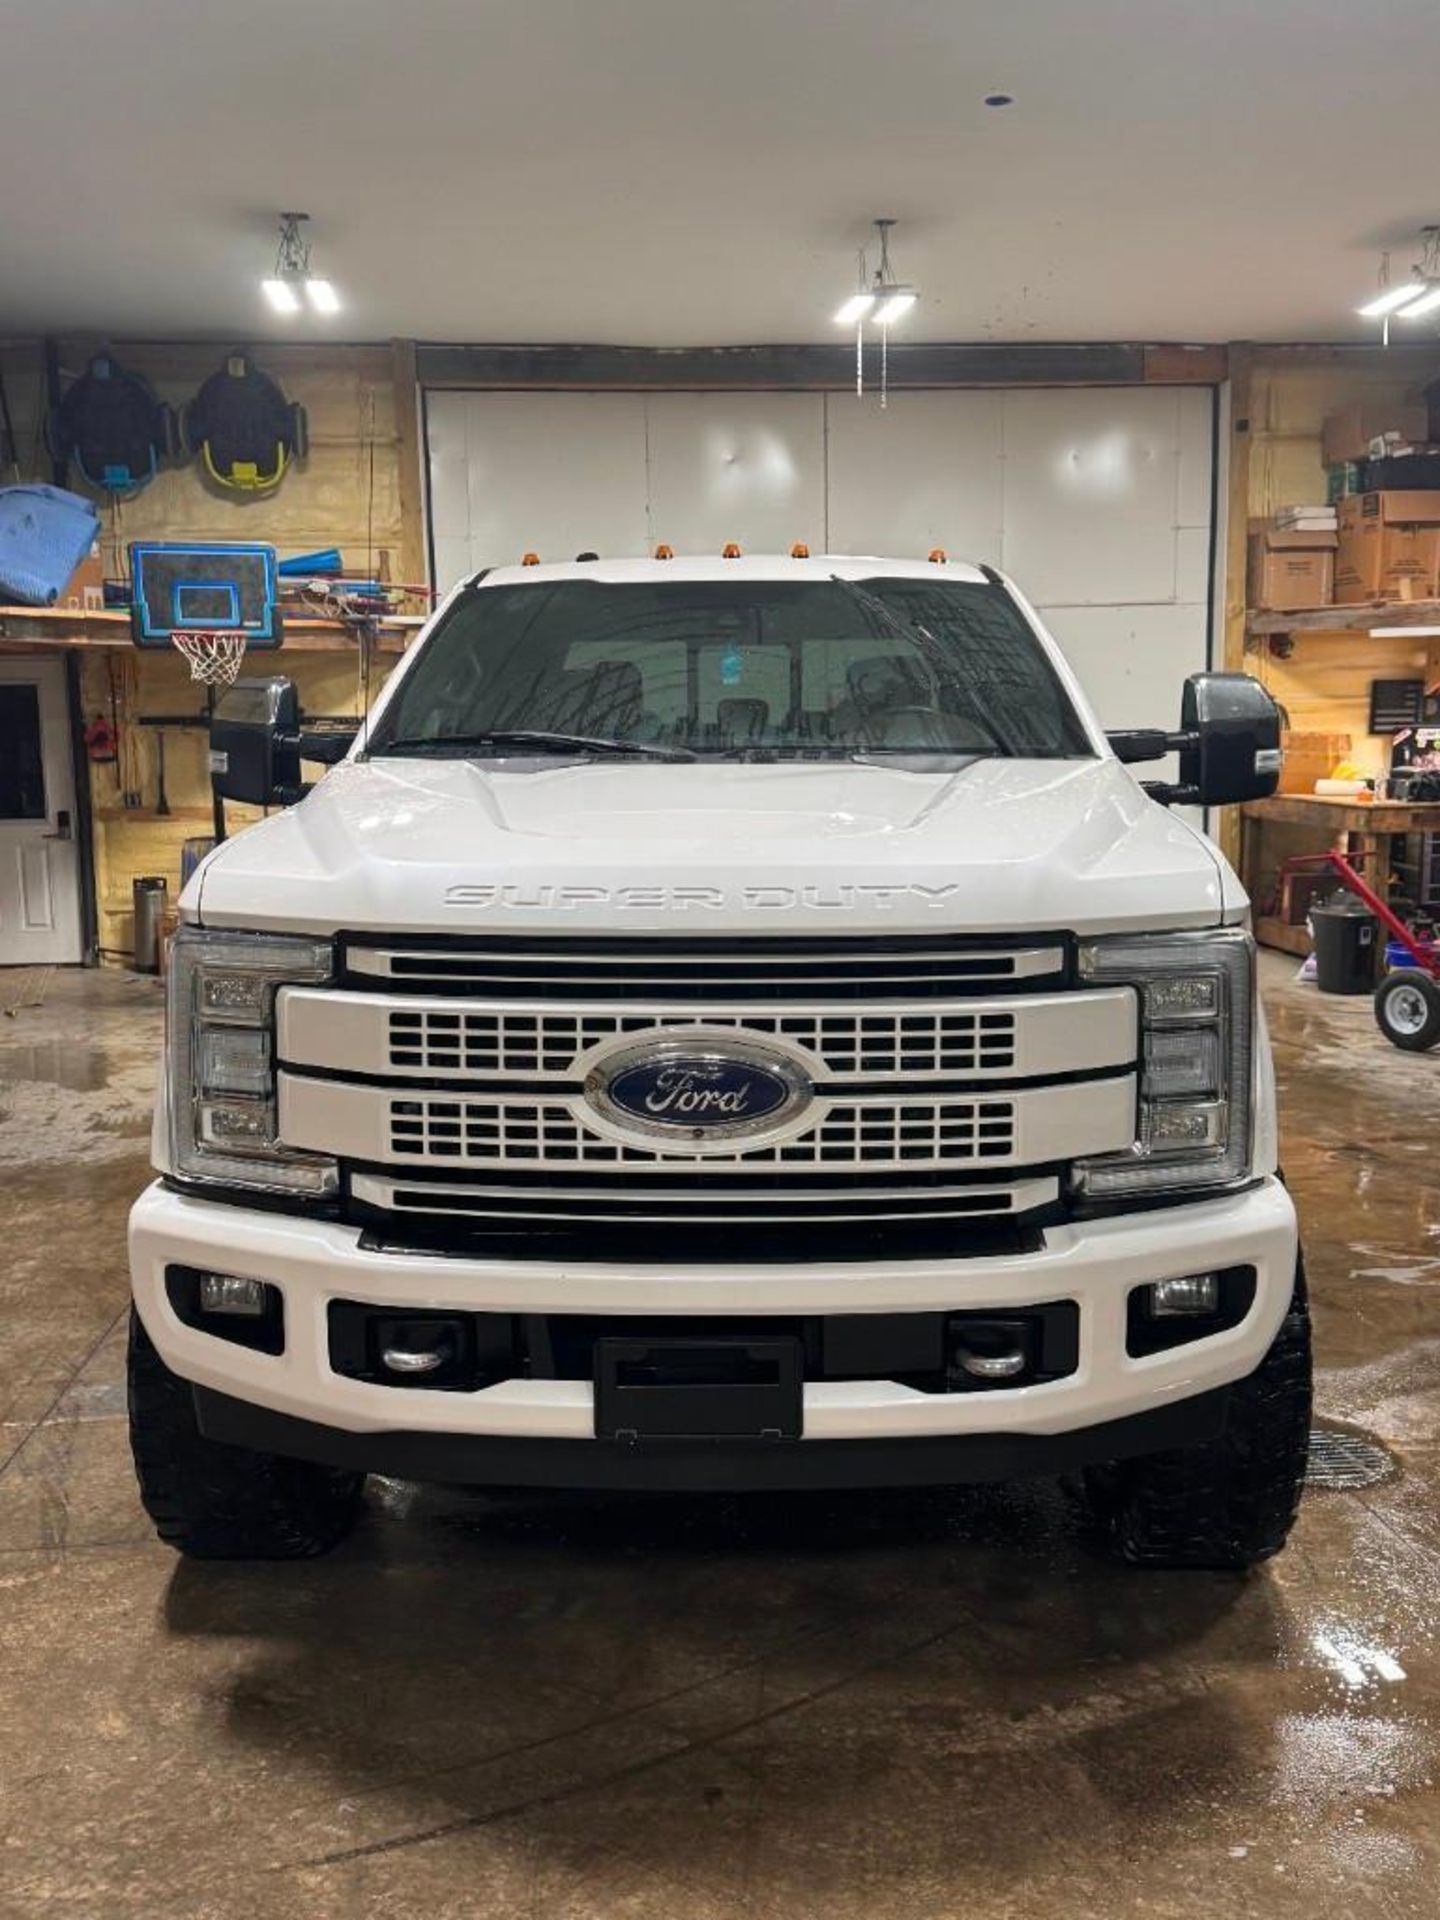 2017 Ford F-250 Pickup Truck (located off-site, please read description) - Image 4 of 17